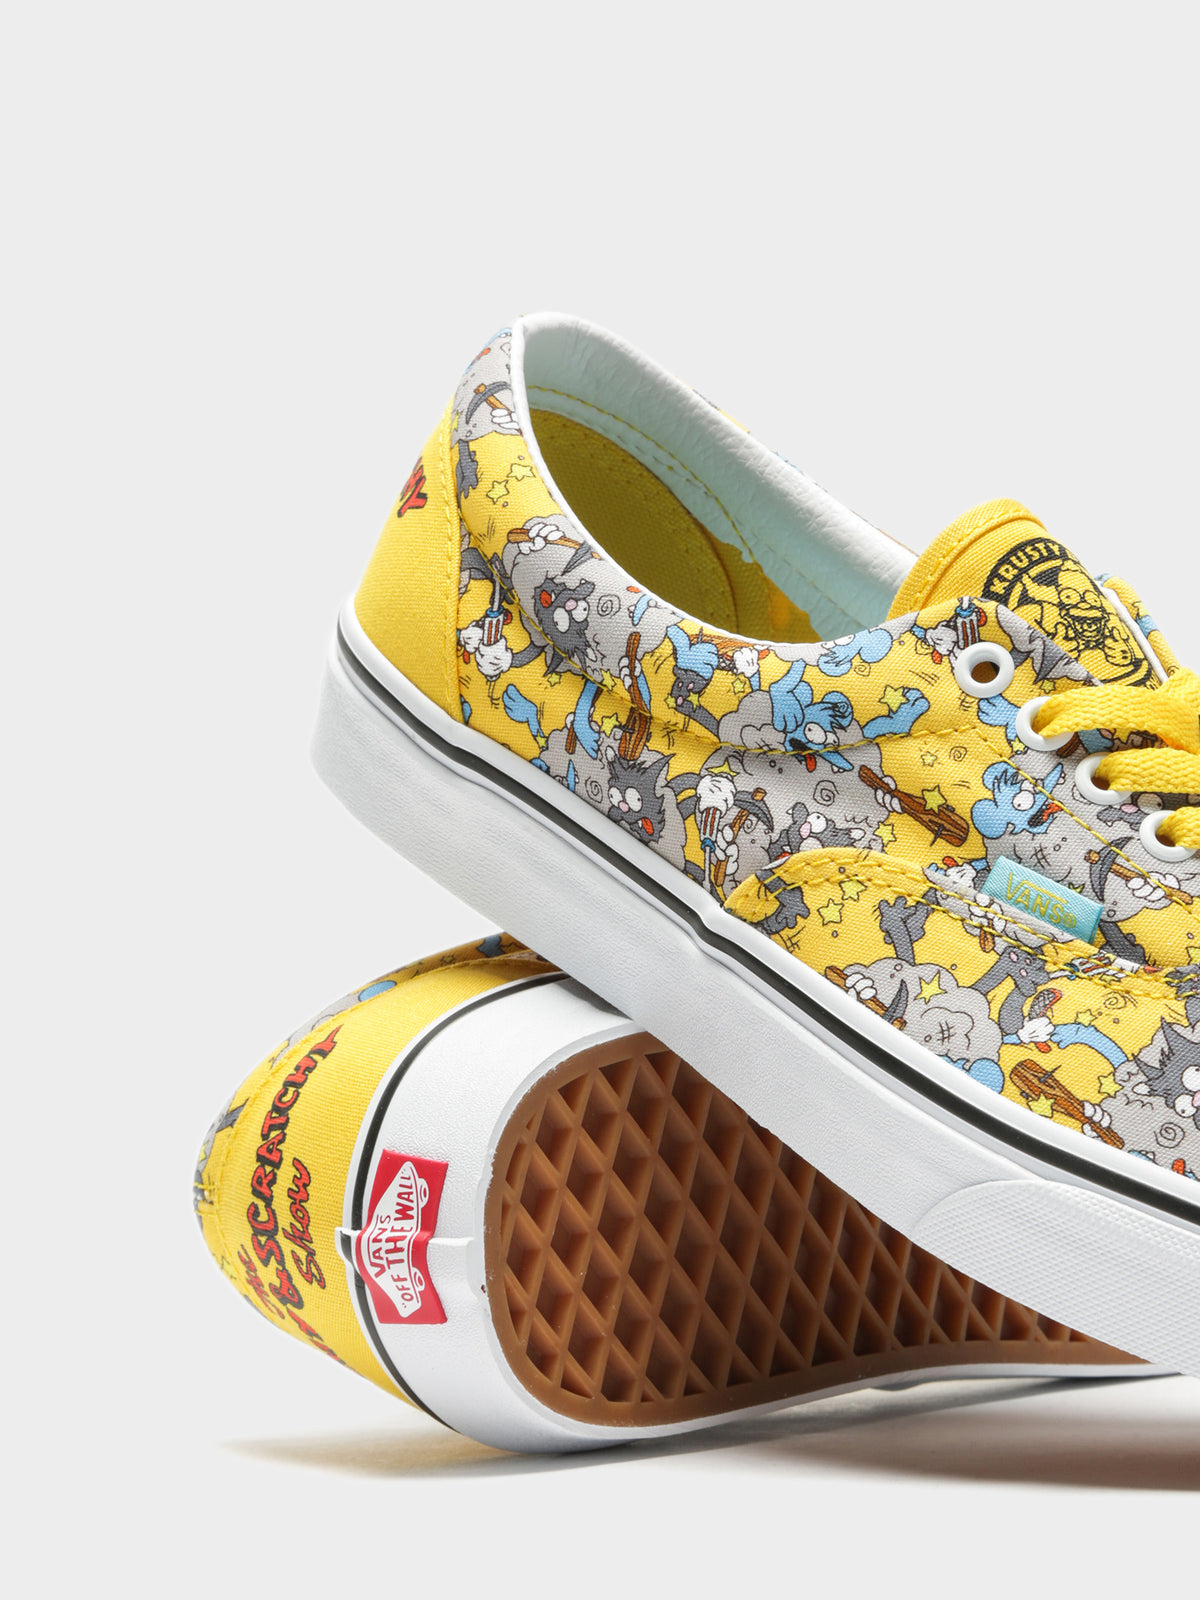 Mens The Simpsons X Vans Itchy &amp; Scratchy Era Sneakers in Yellow